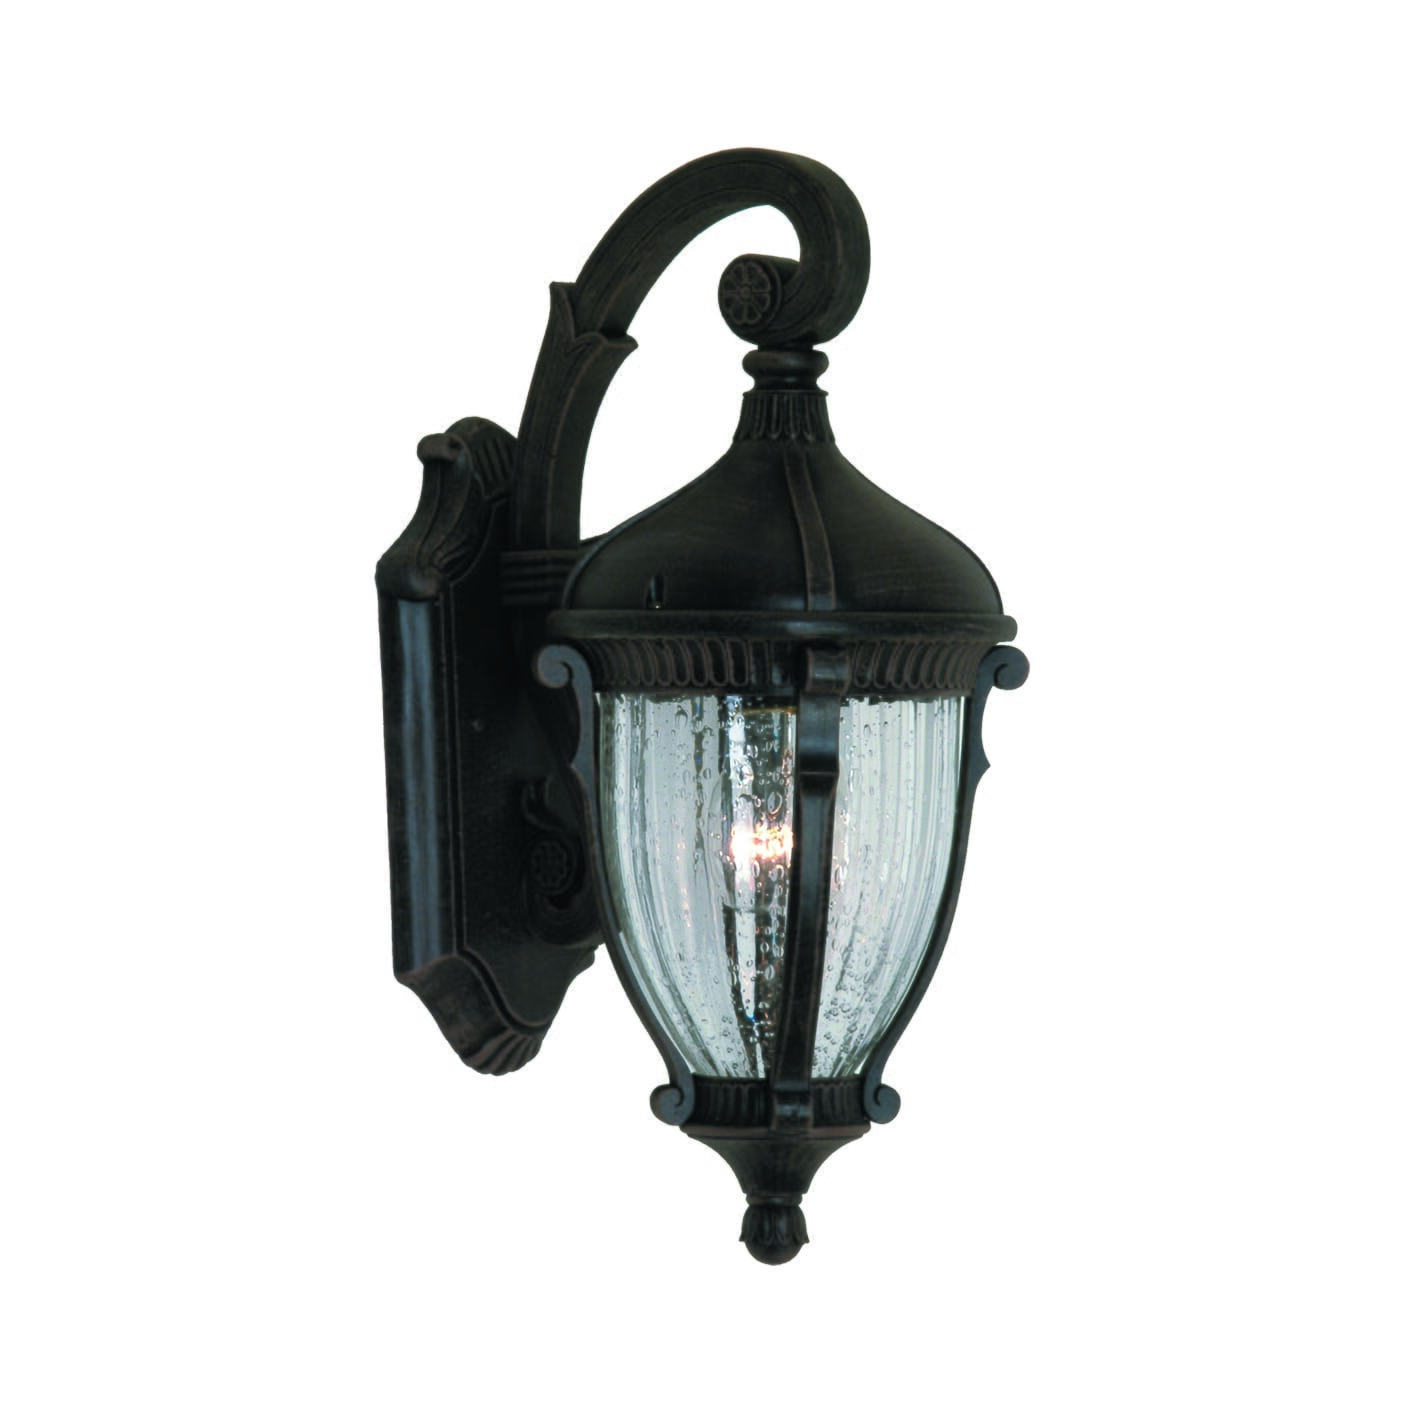 Artcraft Anapolis Outdoor Wall Light in Oil Rubbed Bronze